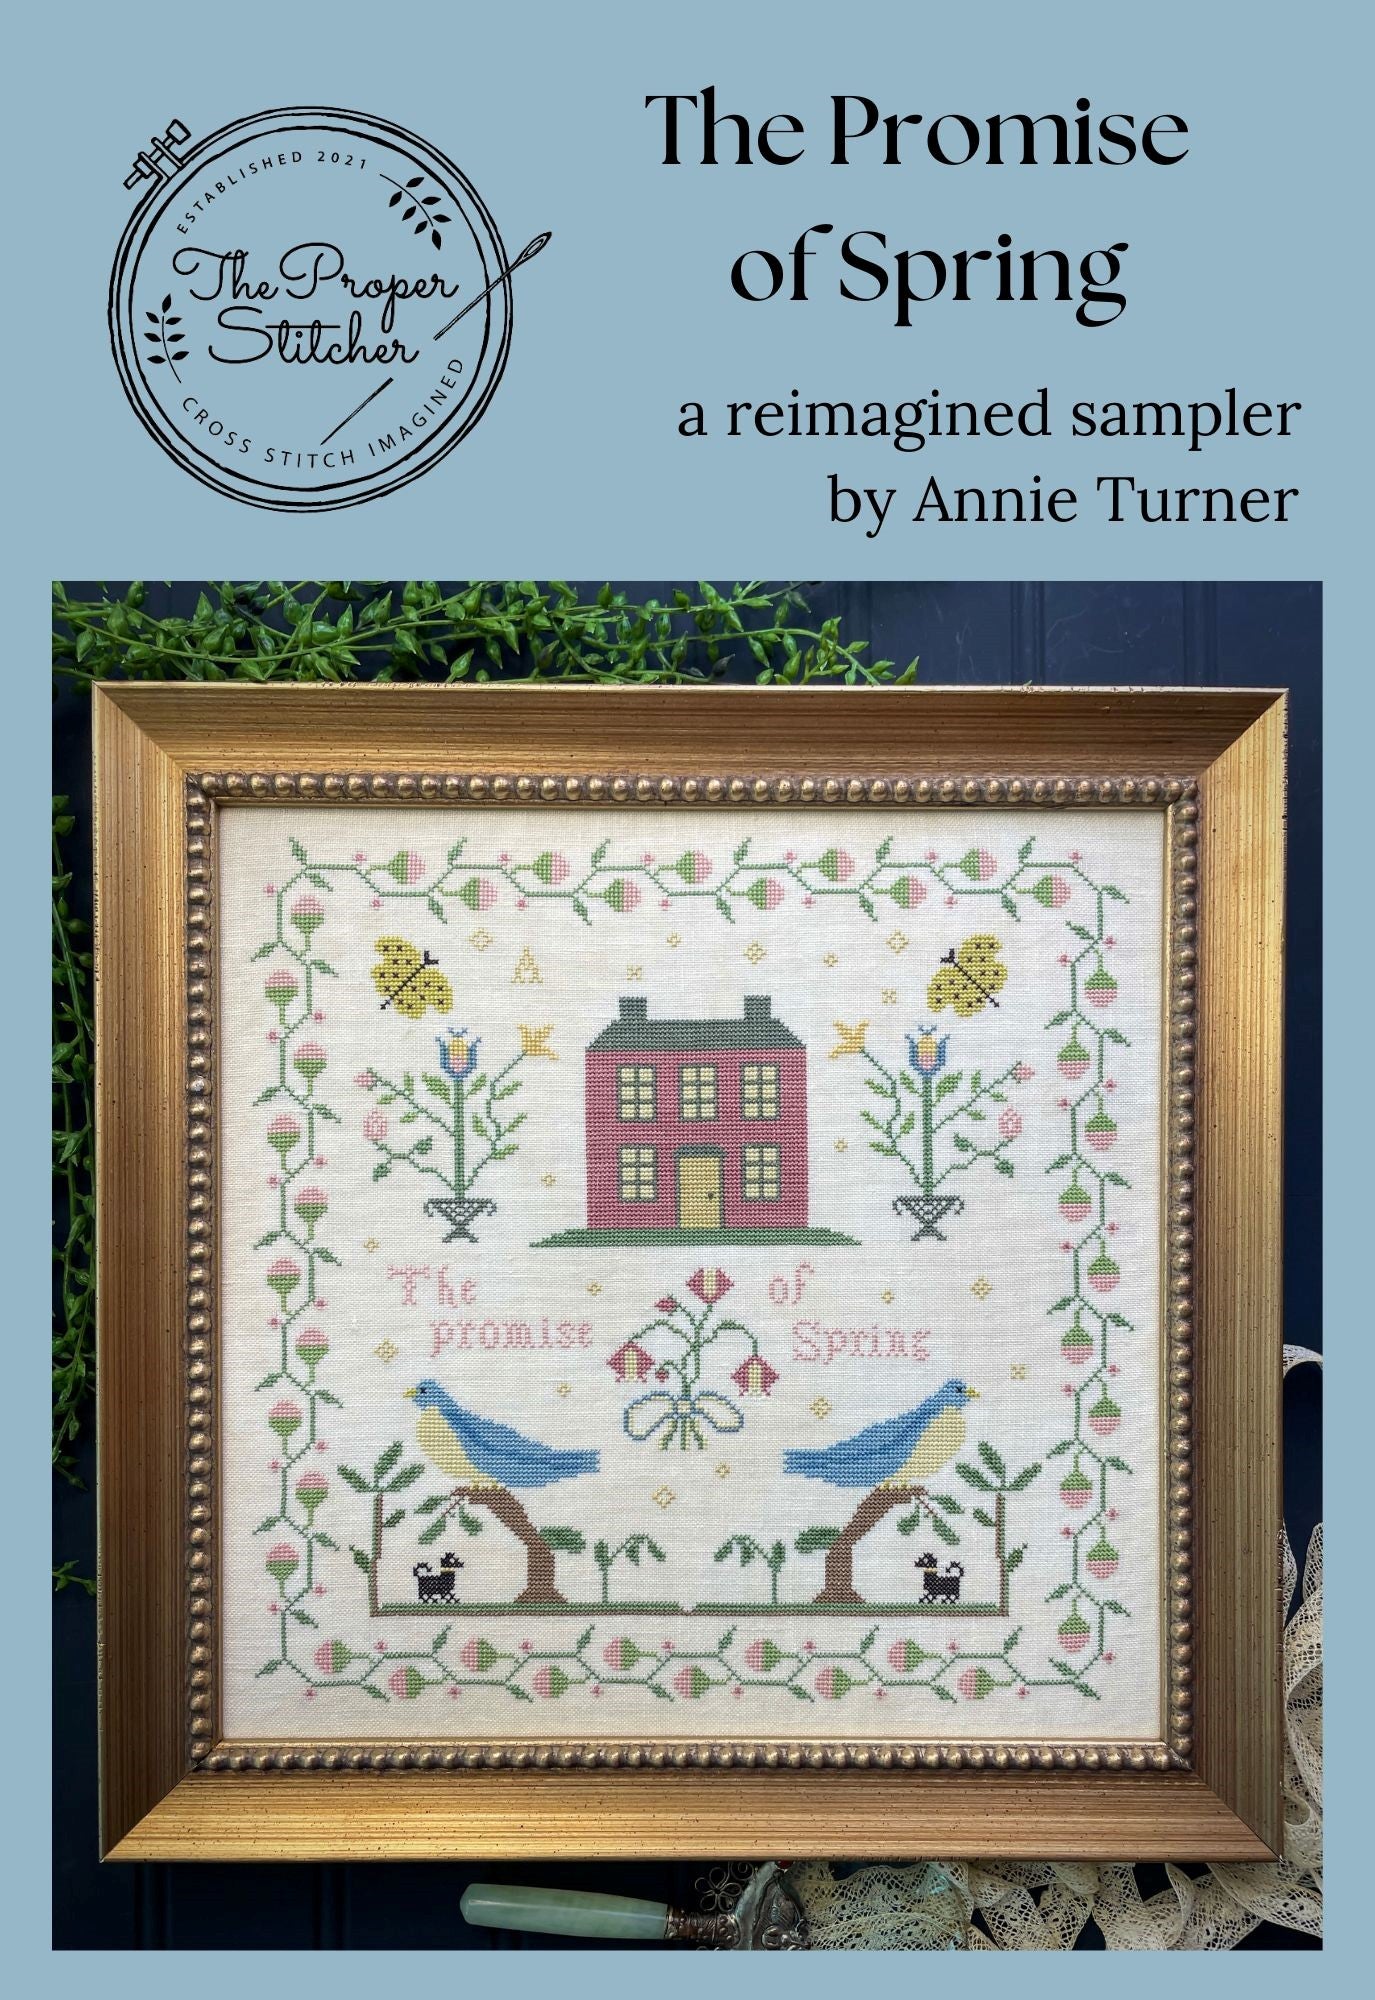 The Promise of Spring  - Cross Stitch Pattern by The Proper Stitcher PREORDER